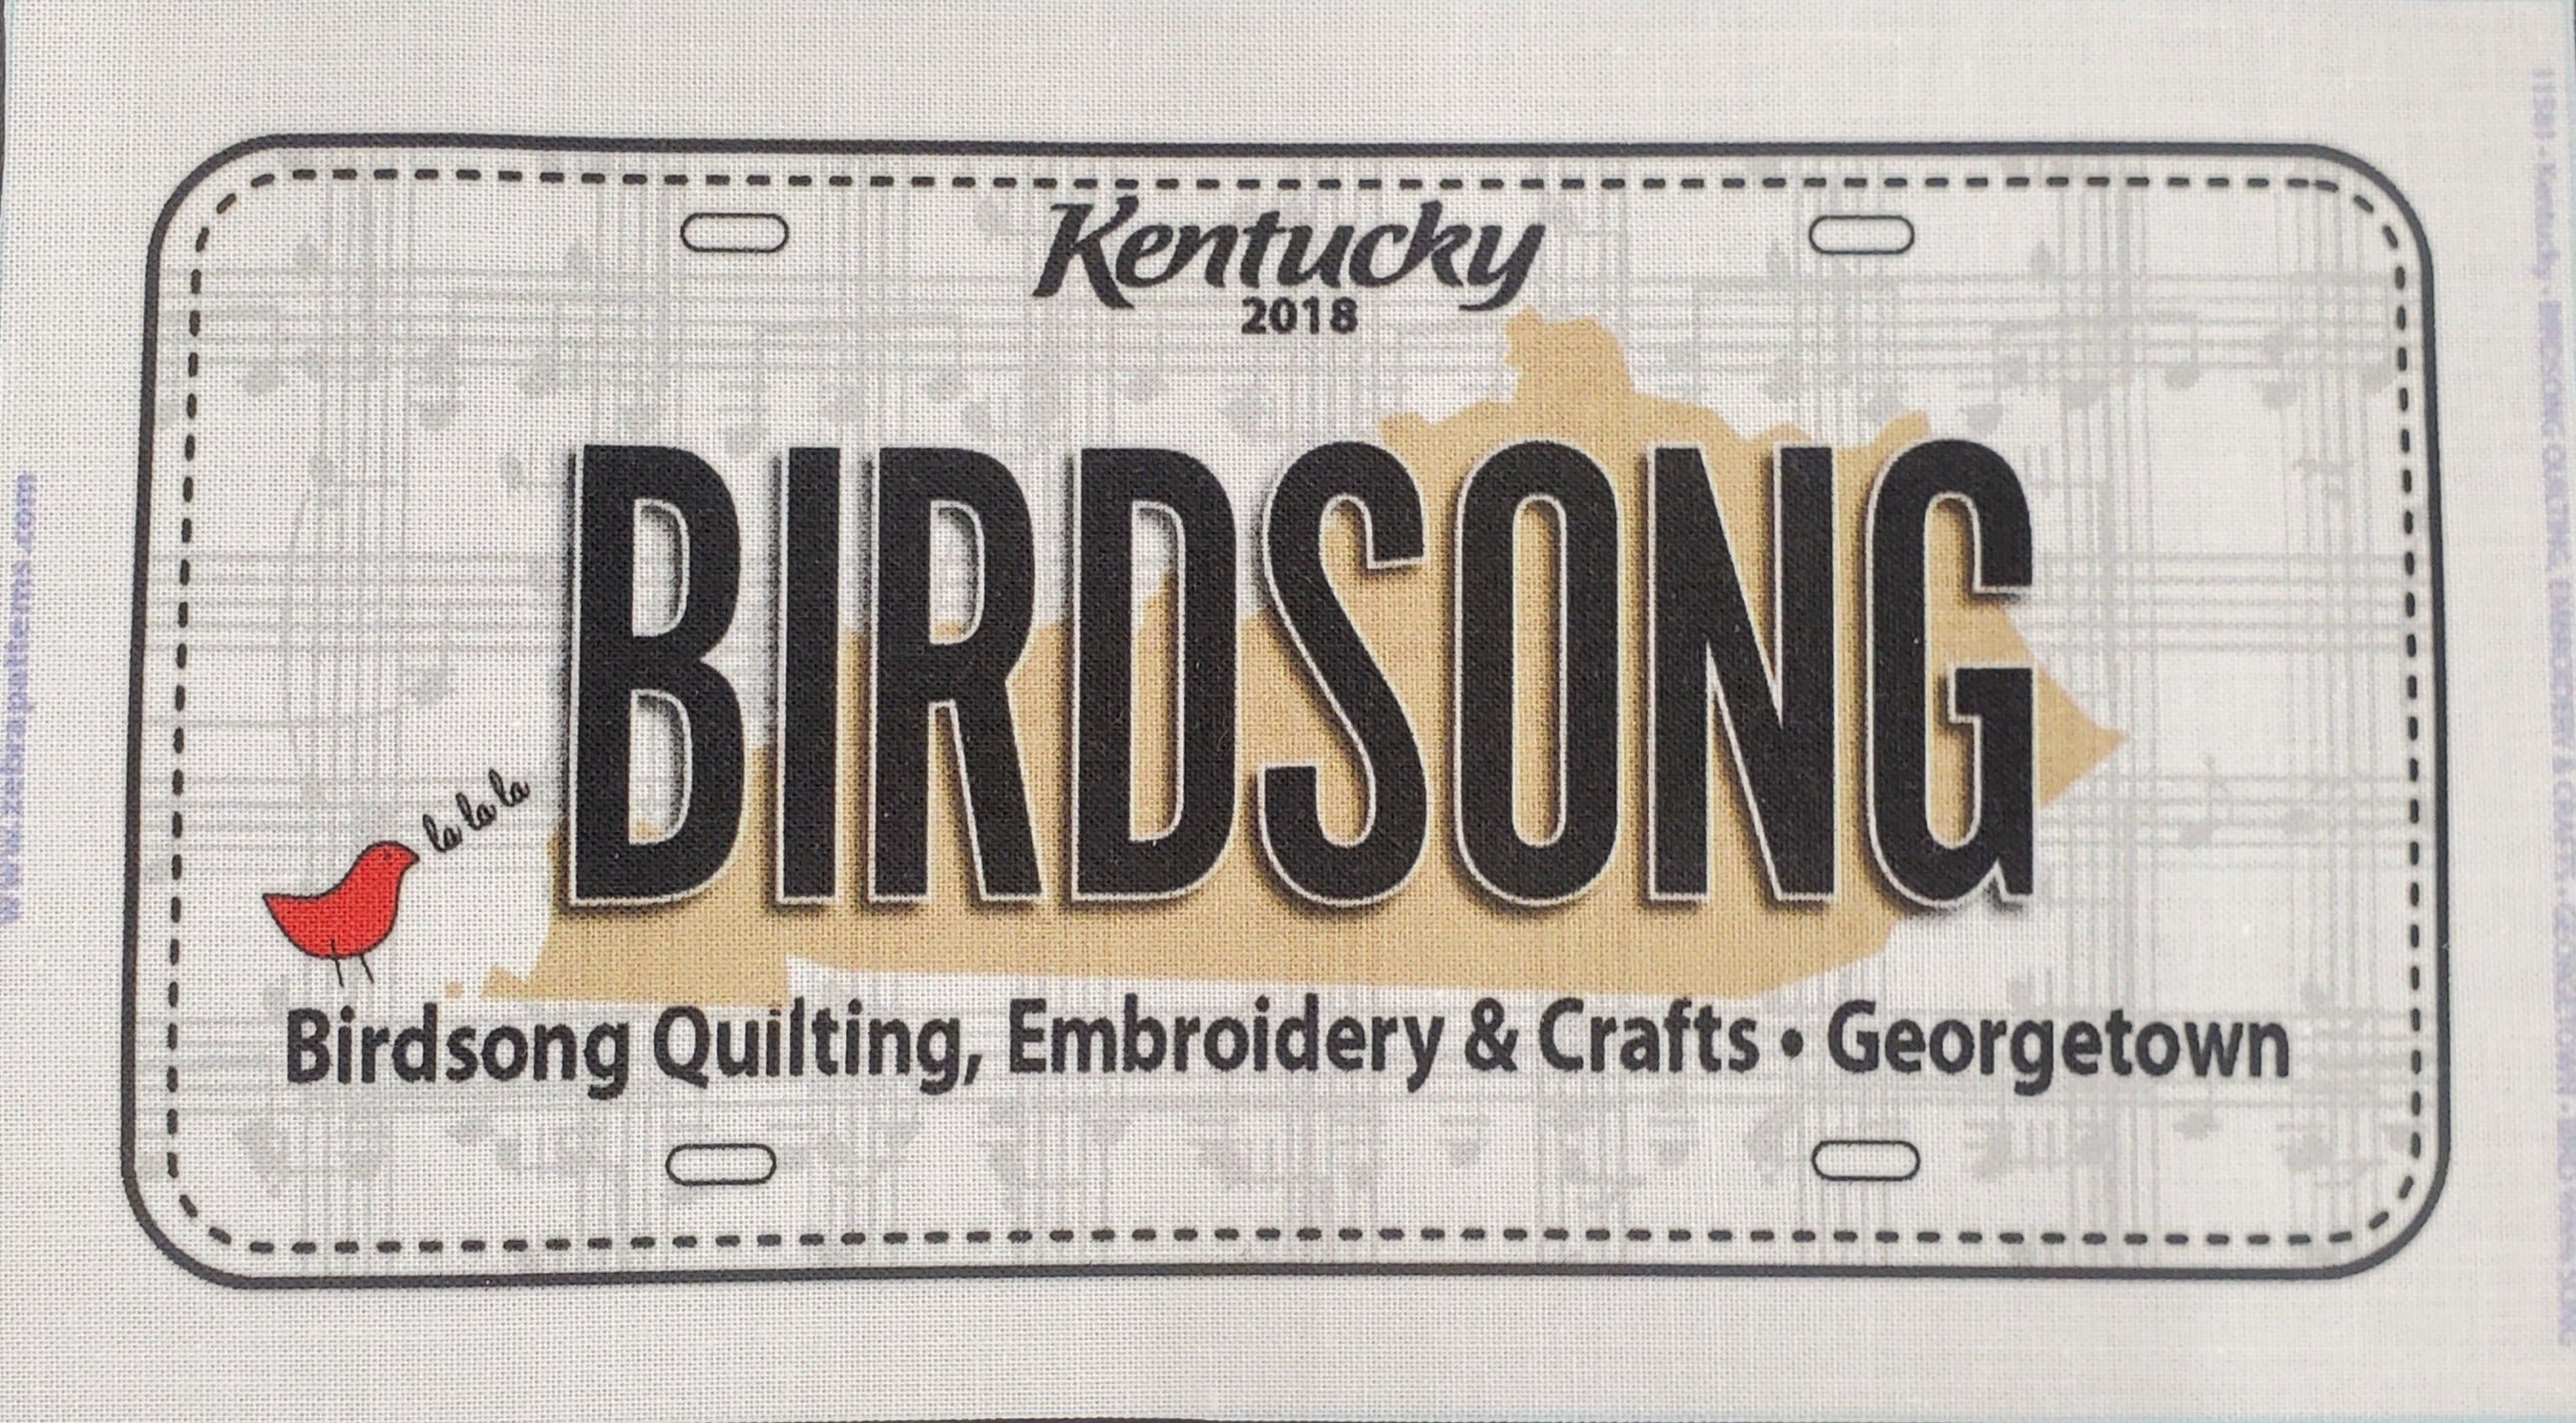 Row by Row License Plate - Kentucky - Birdsong 2018